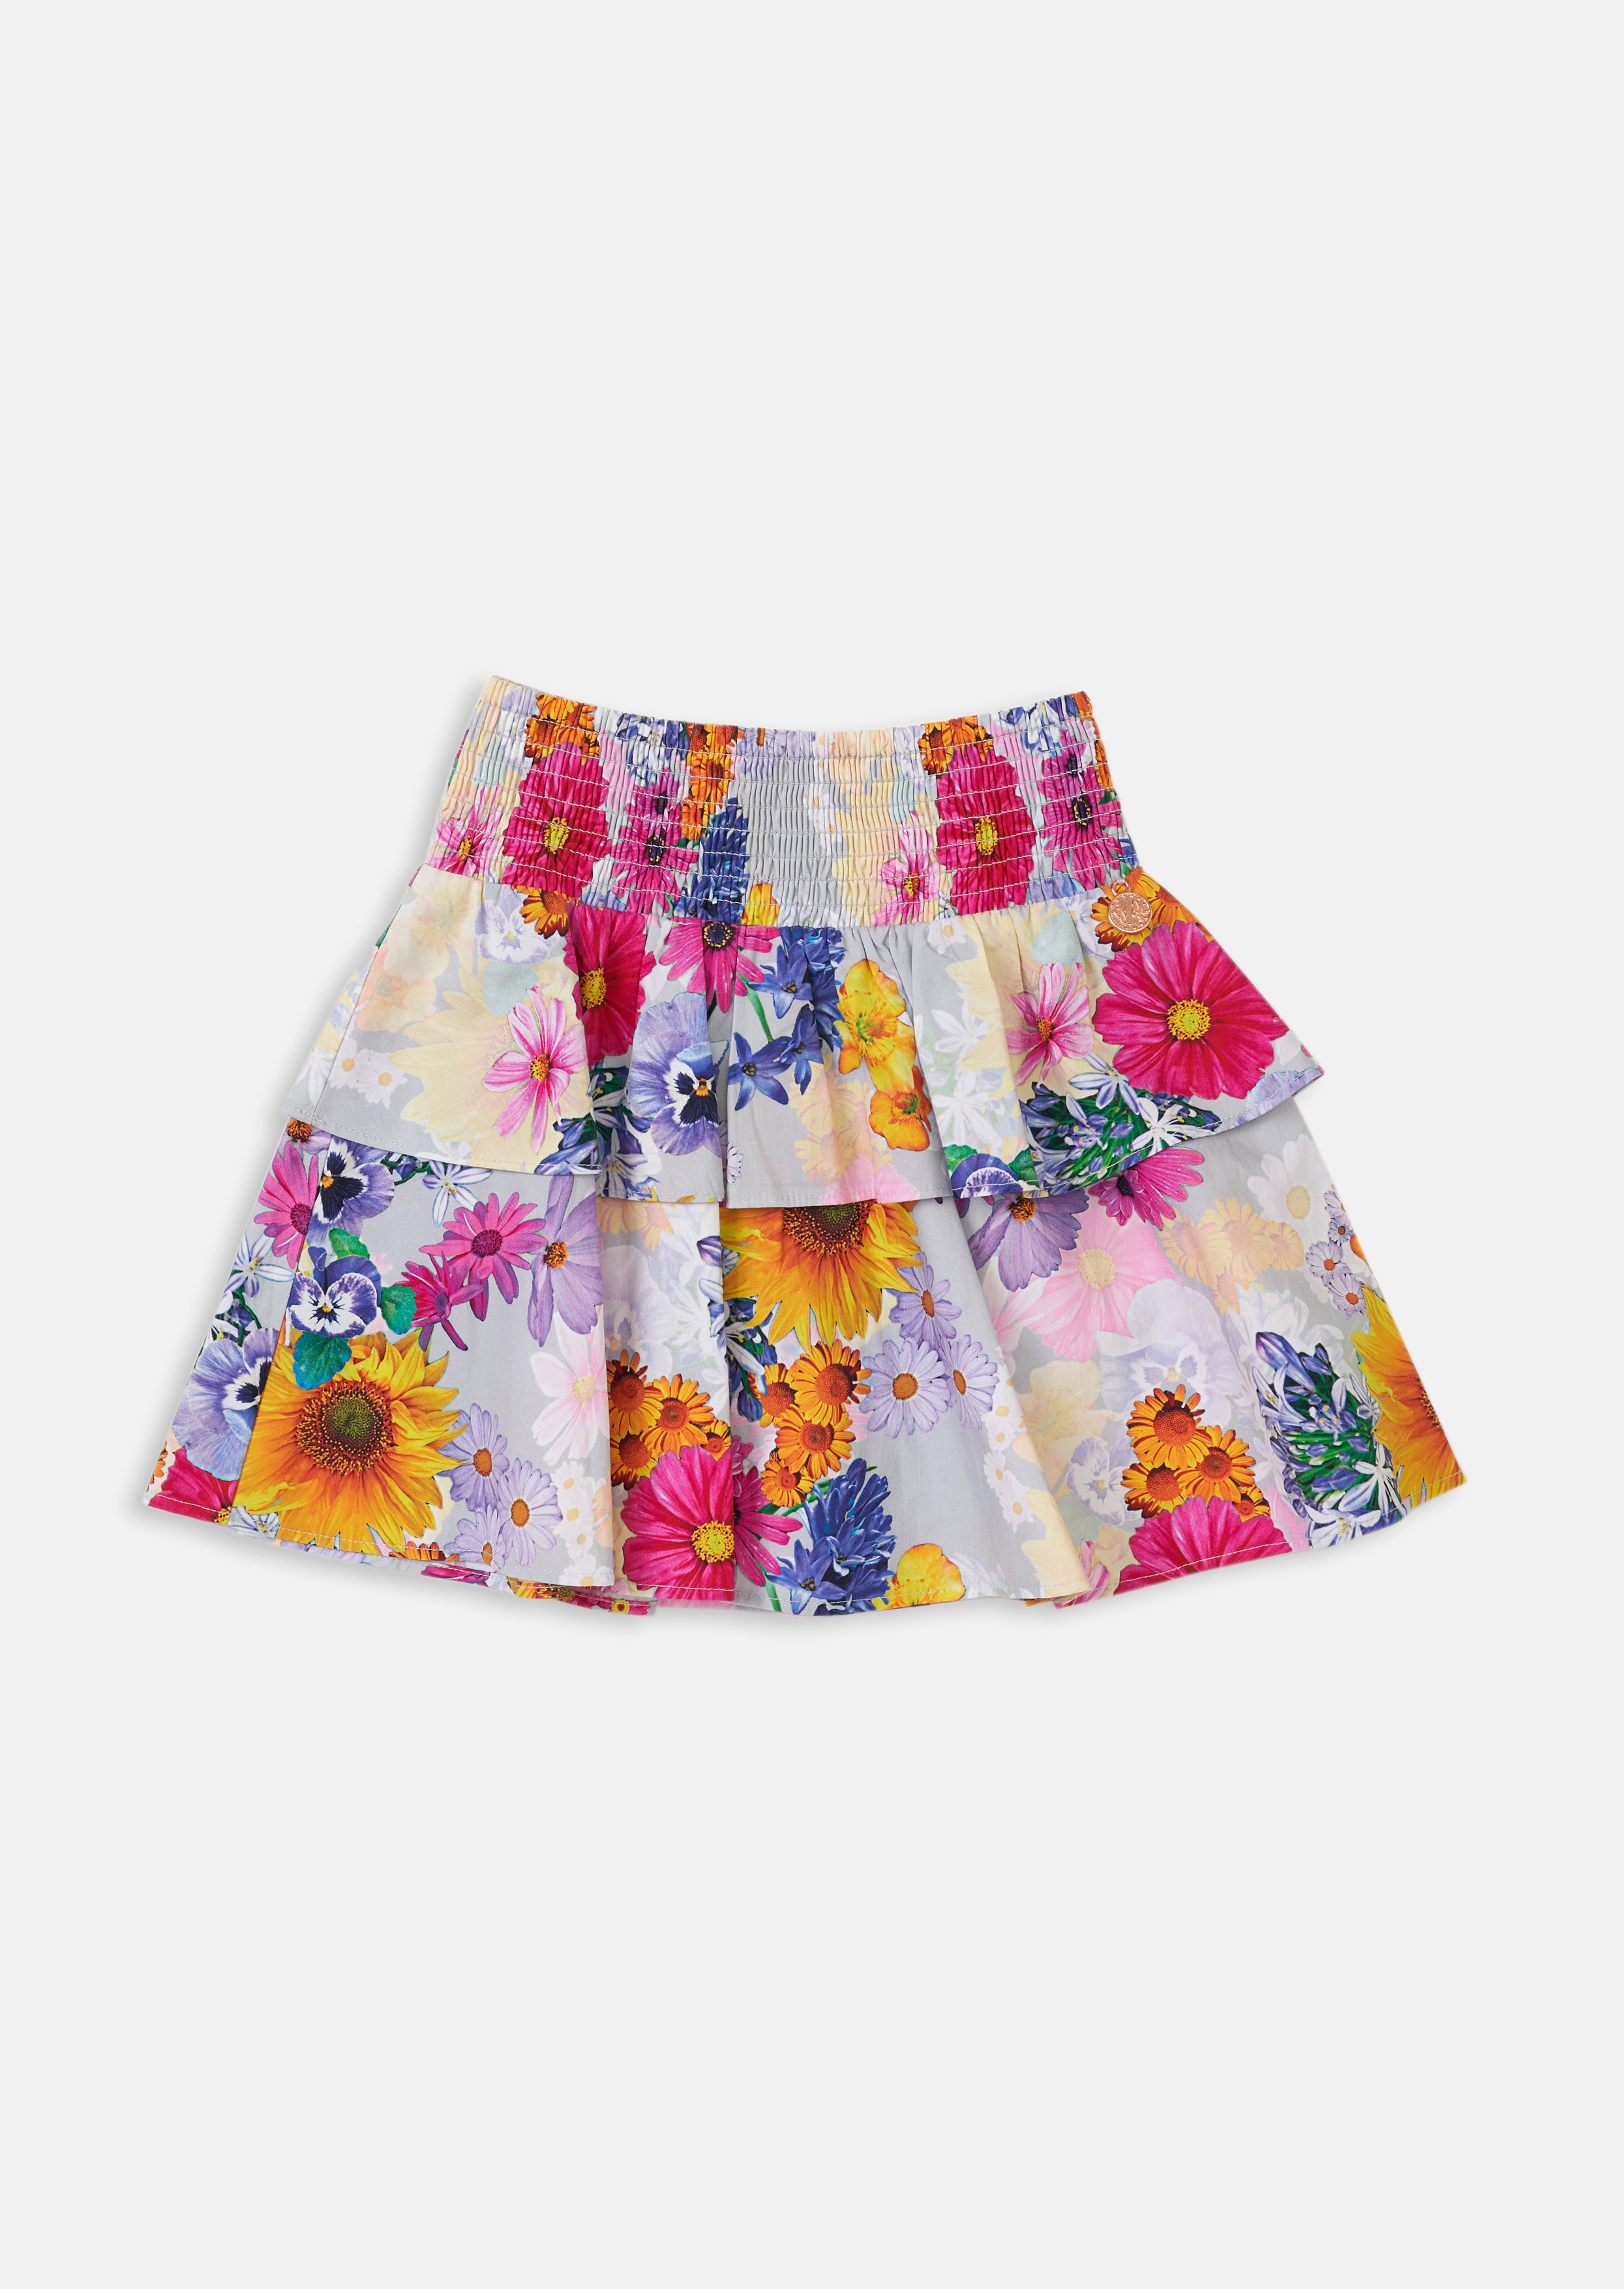 Girls Floral Printed Cotton Skirt